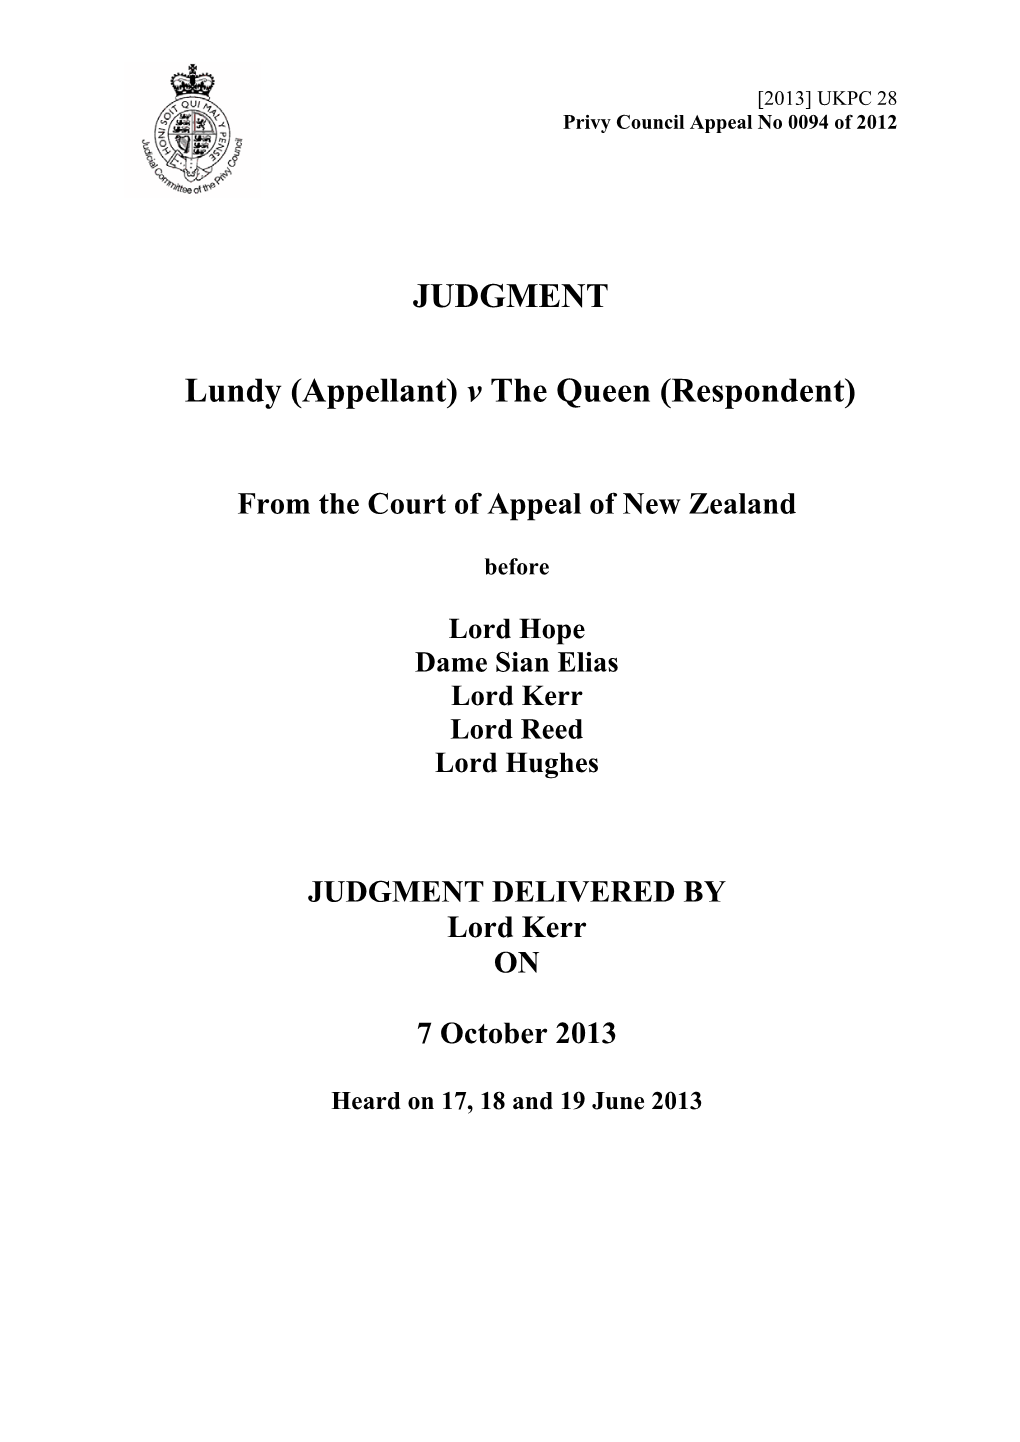 [2013] UKPC 28 Privy Council Appeal No 0094 of 2012